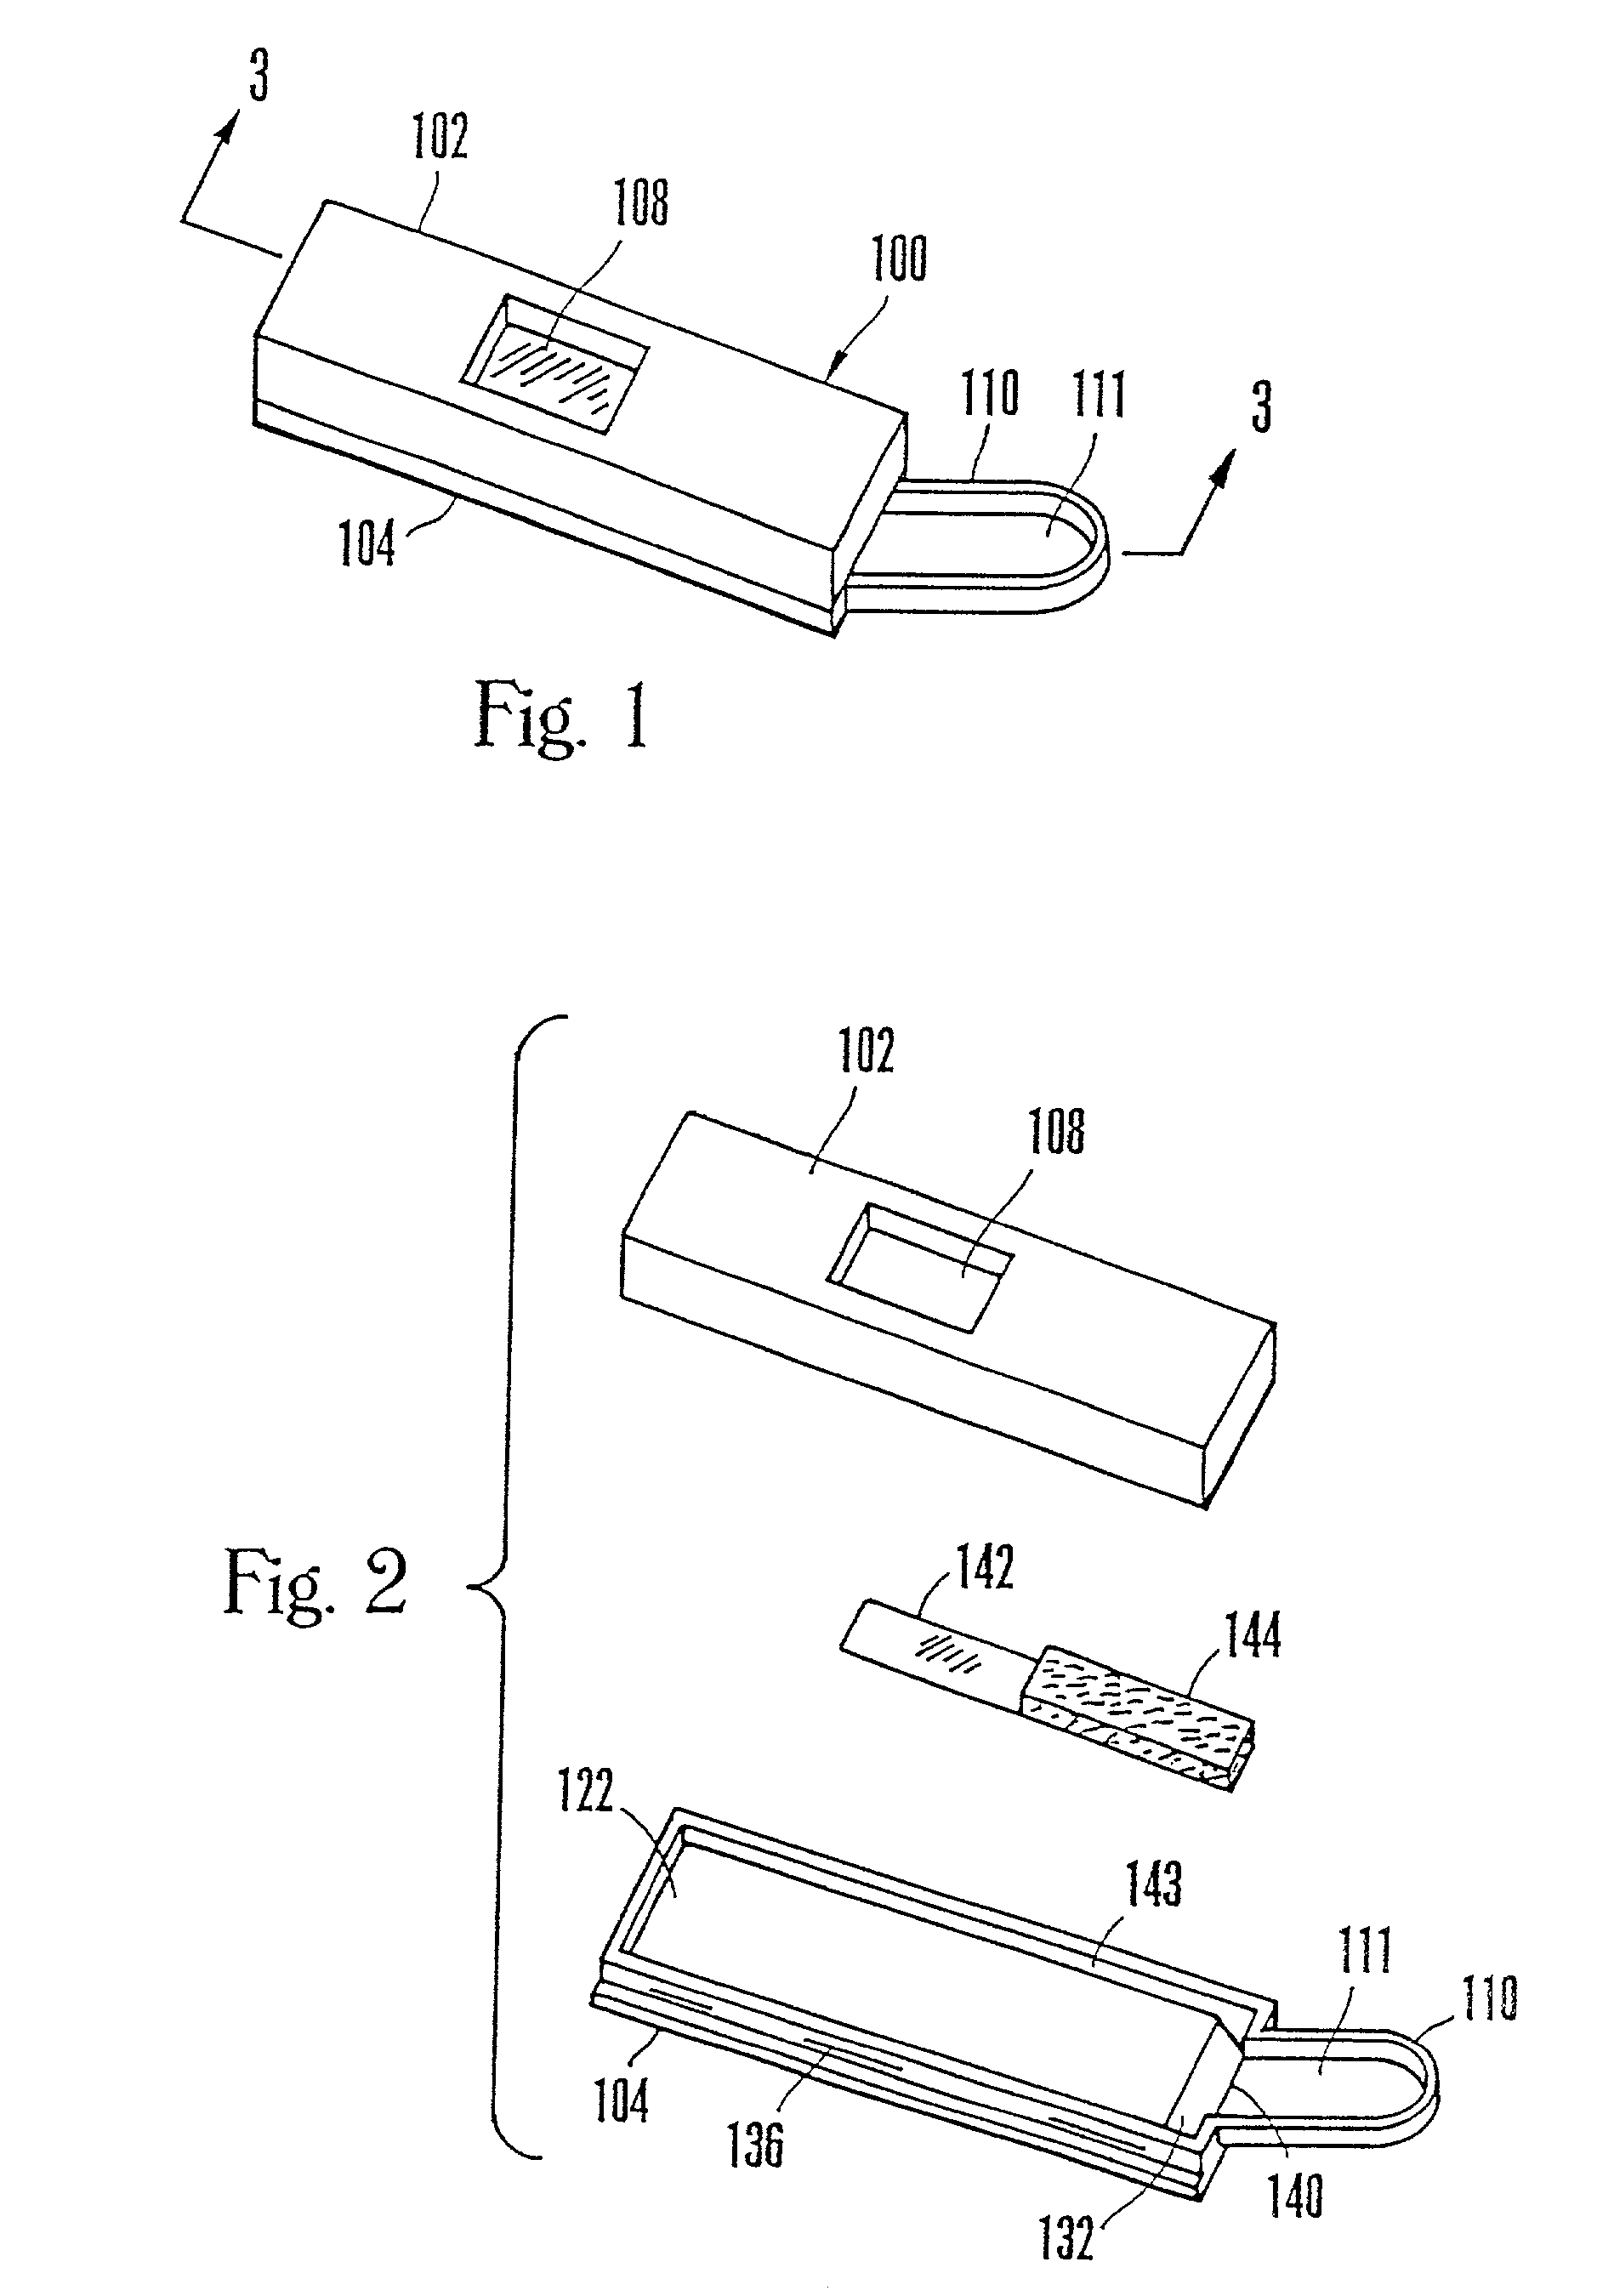 Even fluid front for liquid sample on test strip device